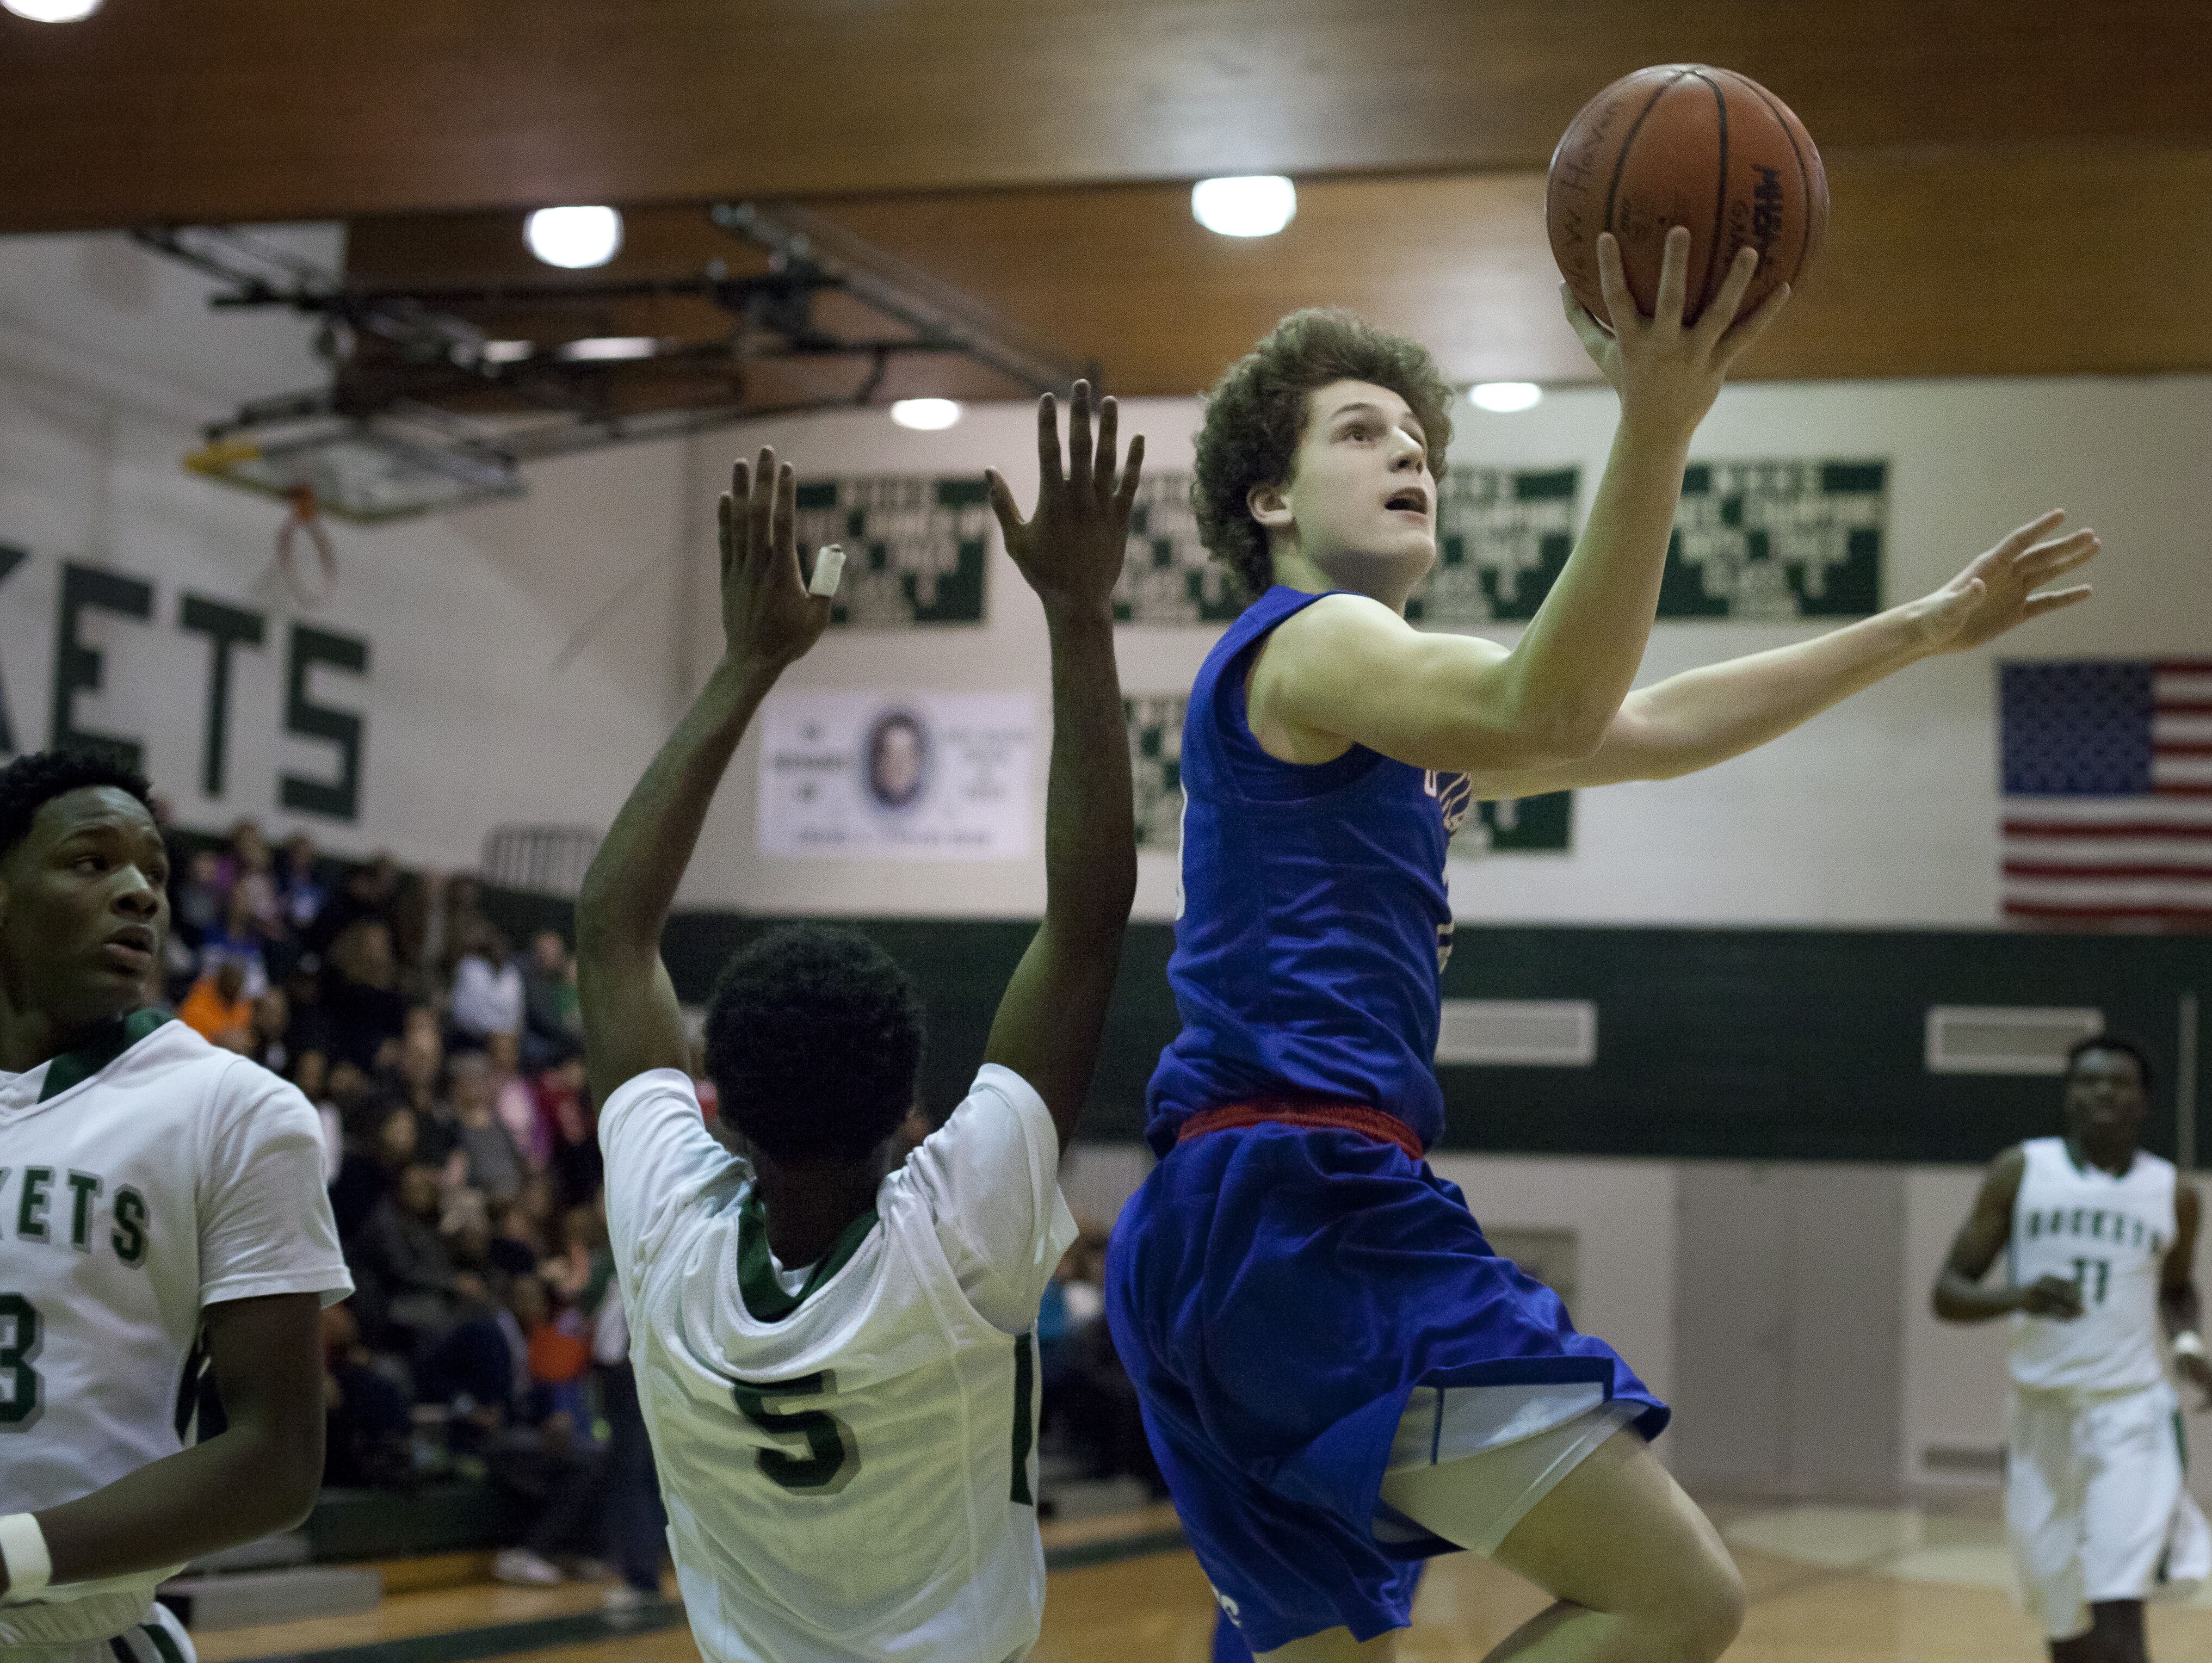 St. Clair sophomore Ben Davidson goes for a shot during a basketball game Tuesday, Jan. 12, 2015 at New Haven High School.